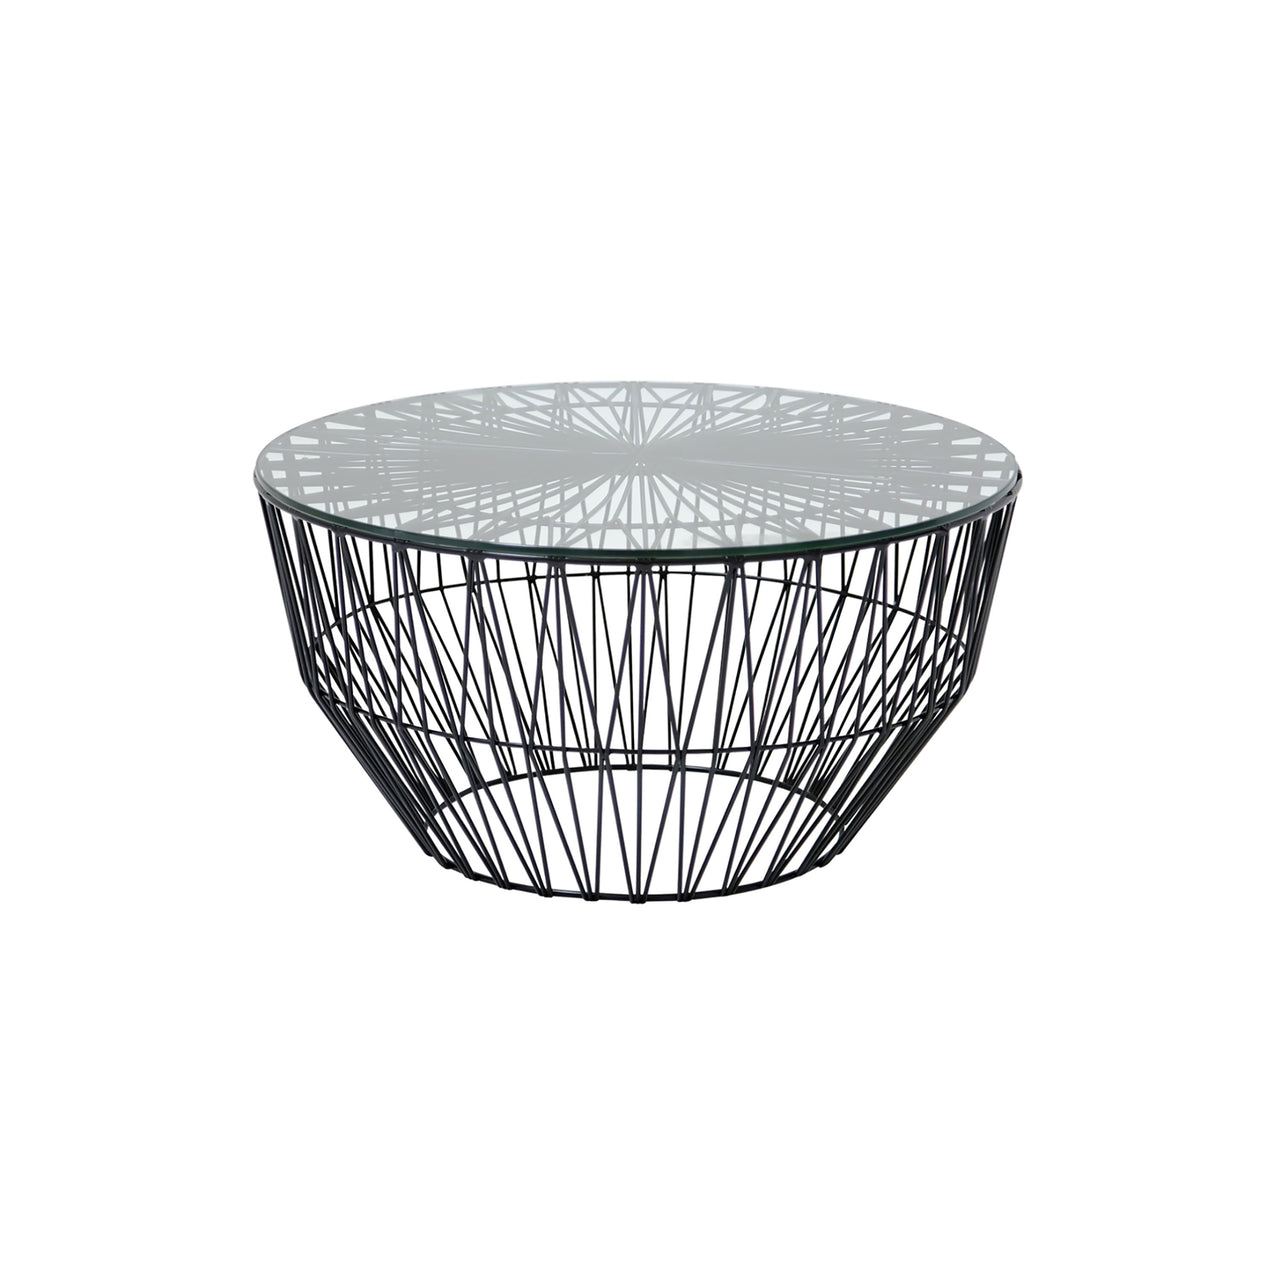 Drum Ottoman/Table: Color + With Glass Top + Black